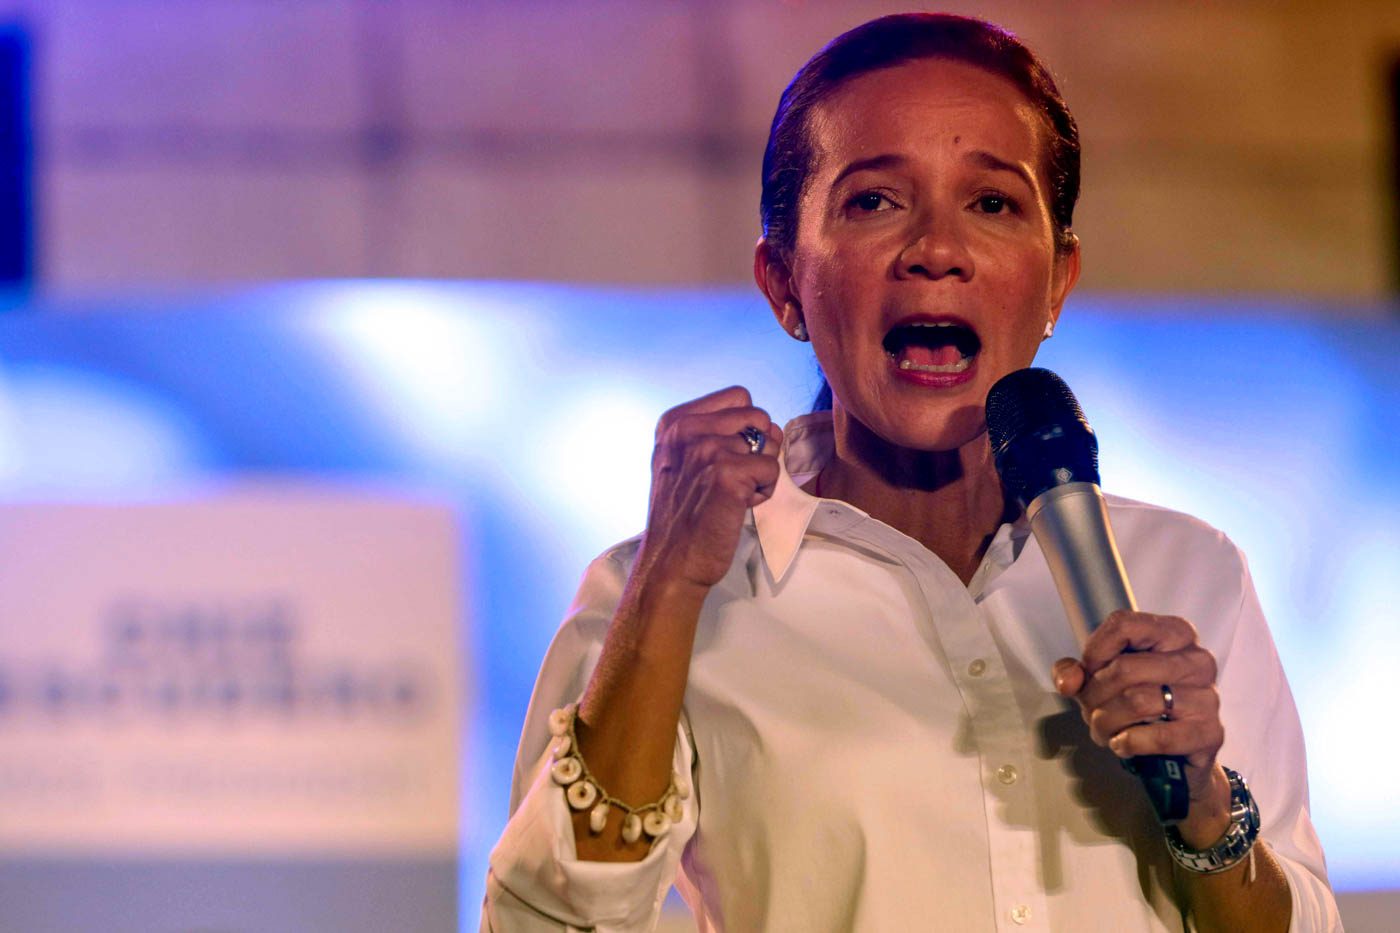 FULL TEXT: Grace Poe: ‘This fight is for your future’